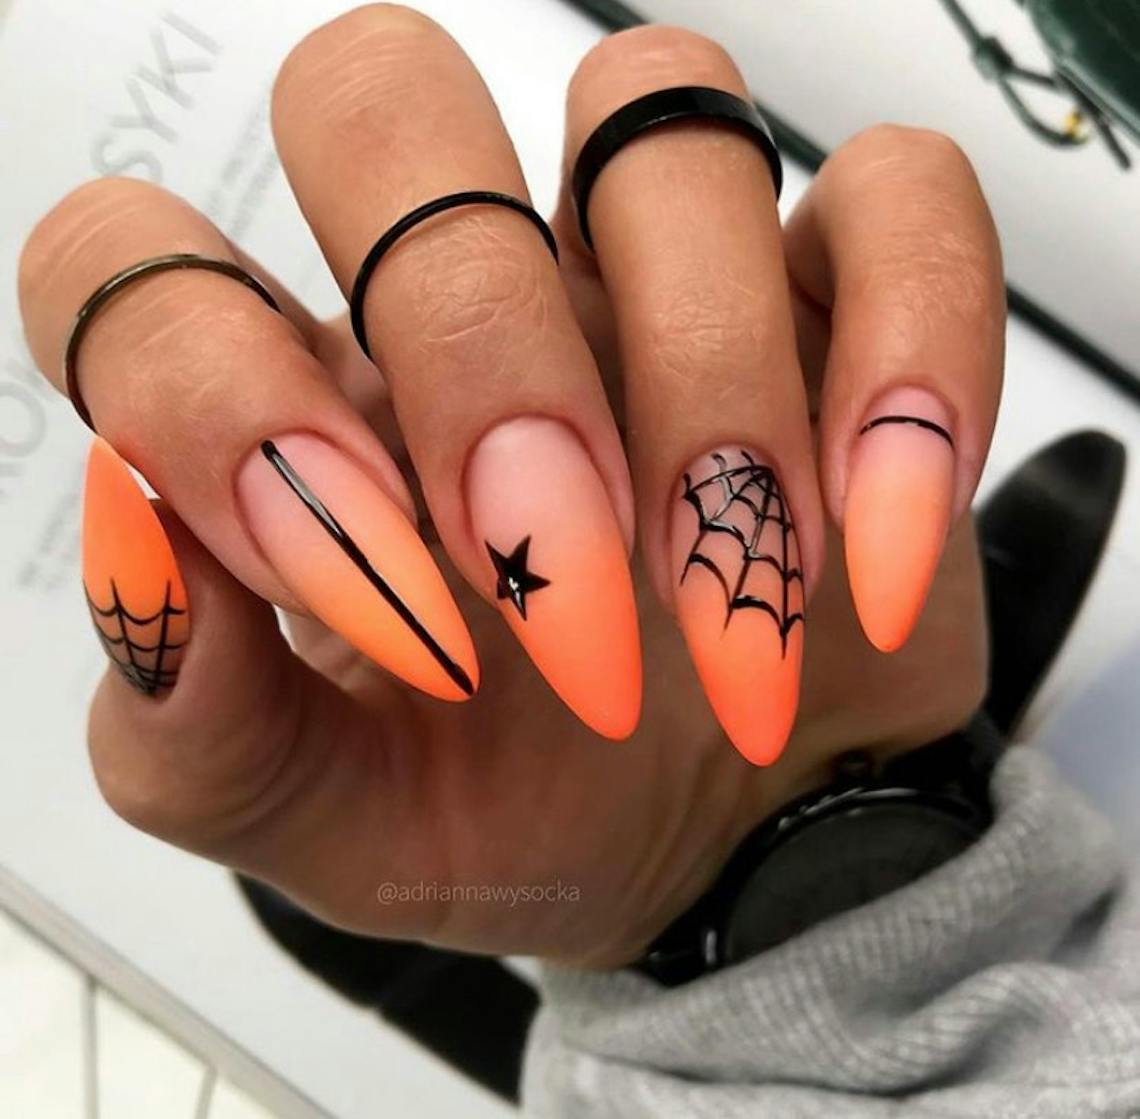 The 5 Most-Popular Halloween Looks on Instagram | Nailpro